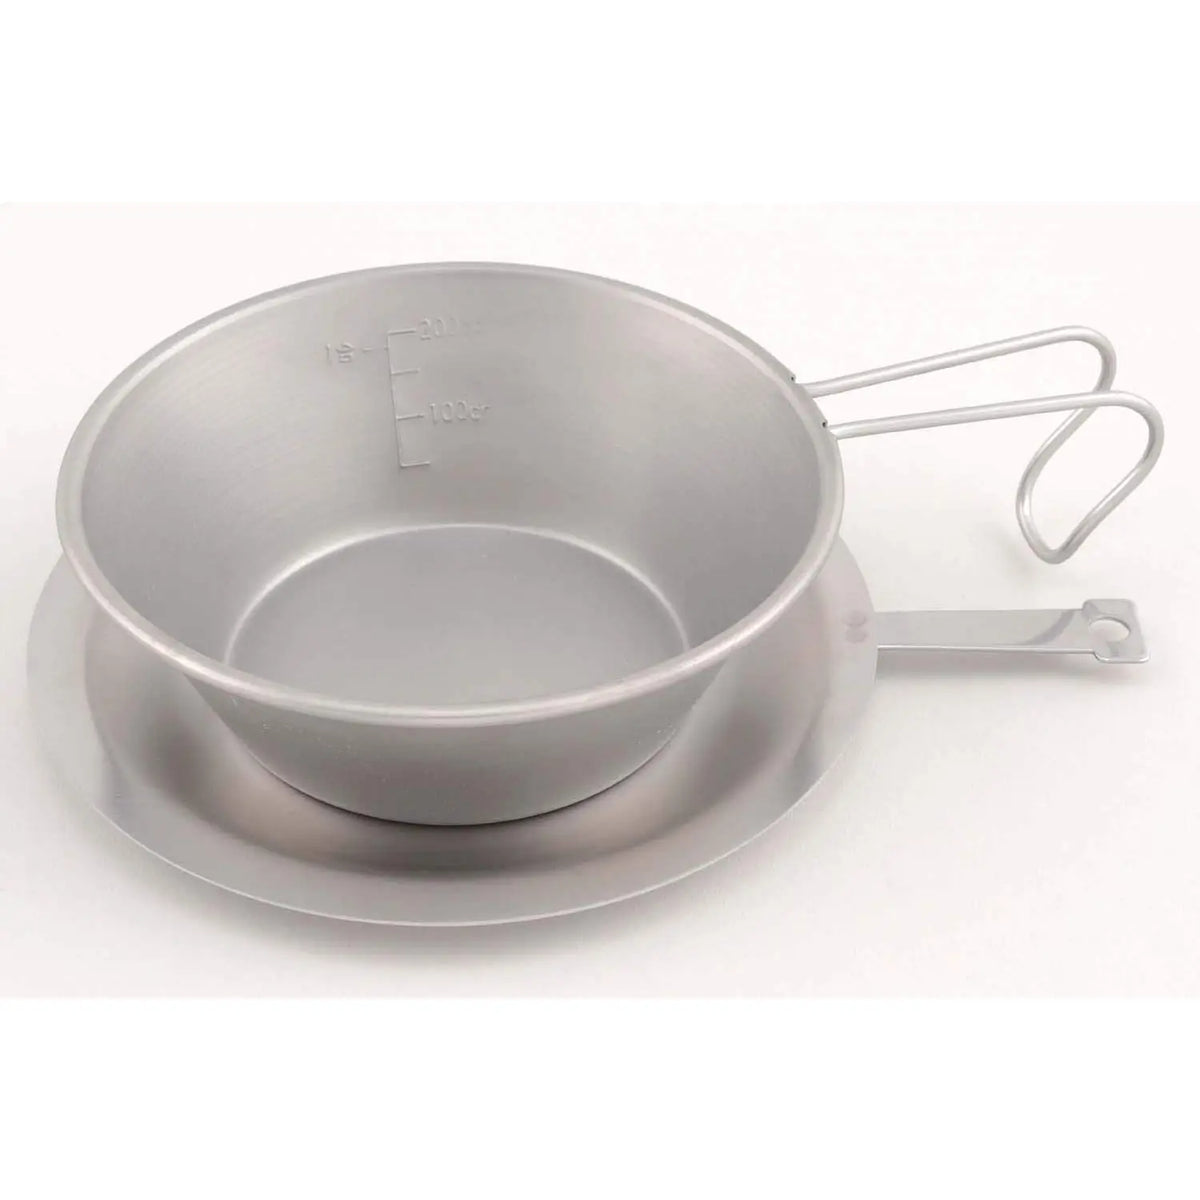 PTYGRACE Stainless Steel Lid for Sierra Cup